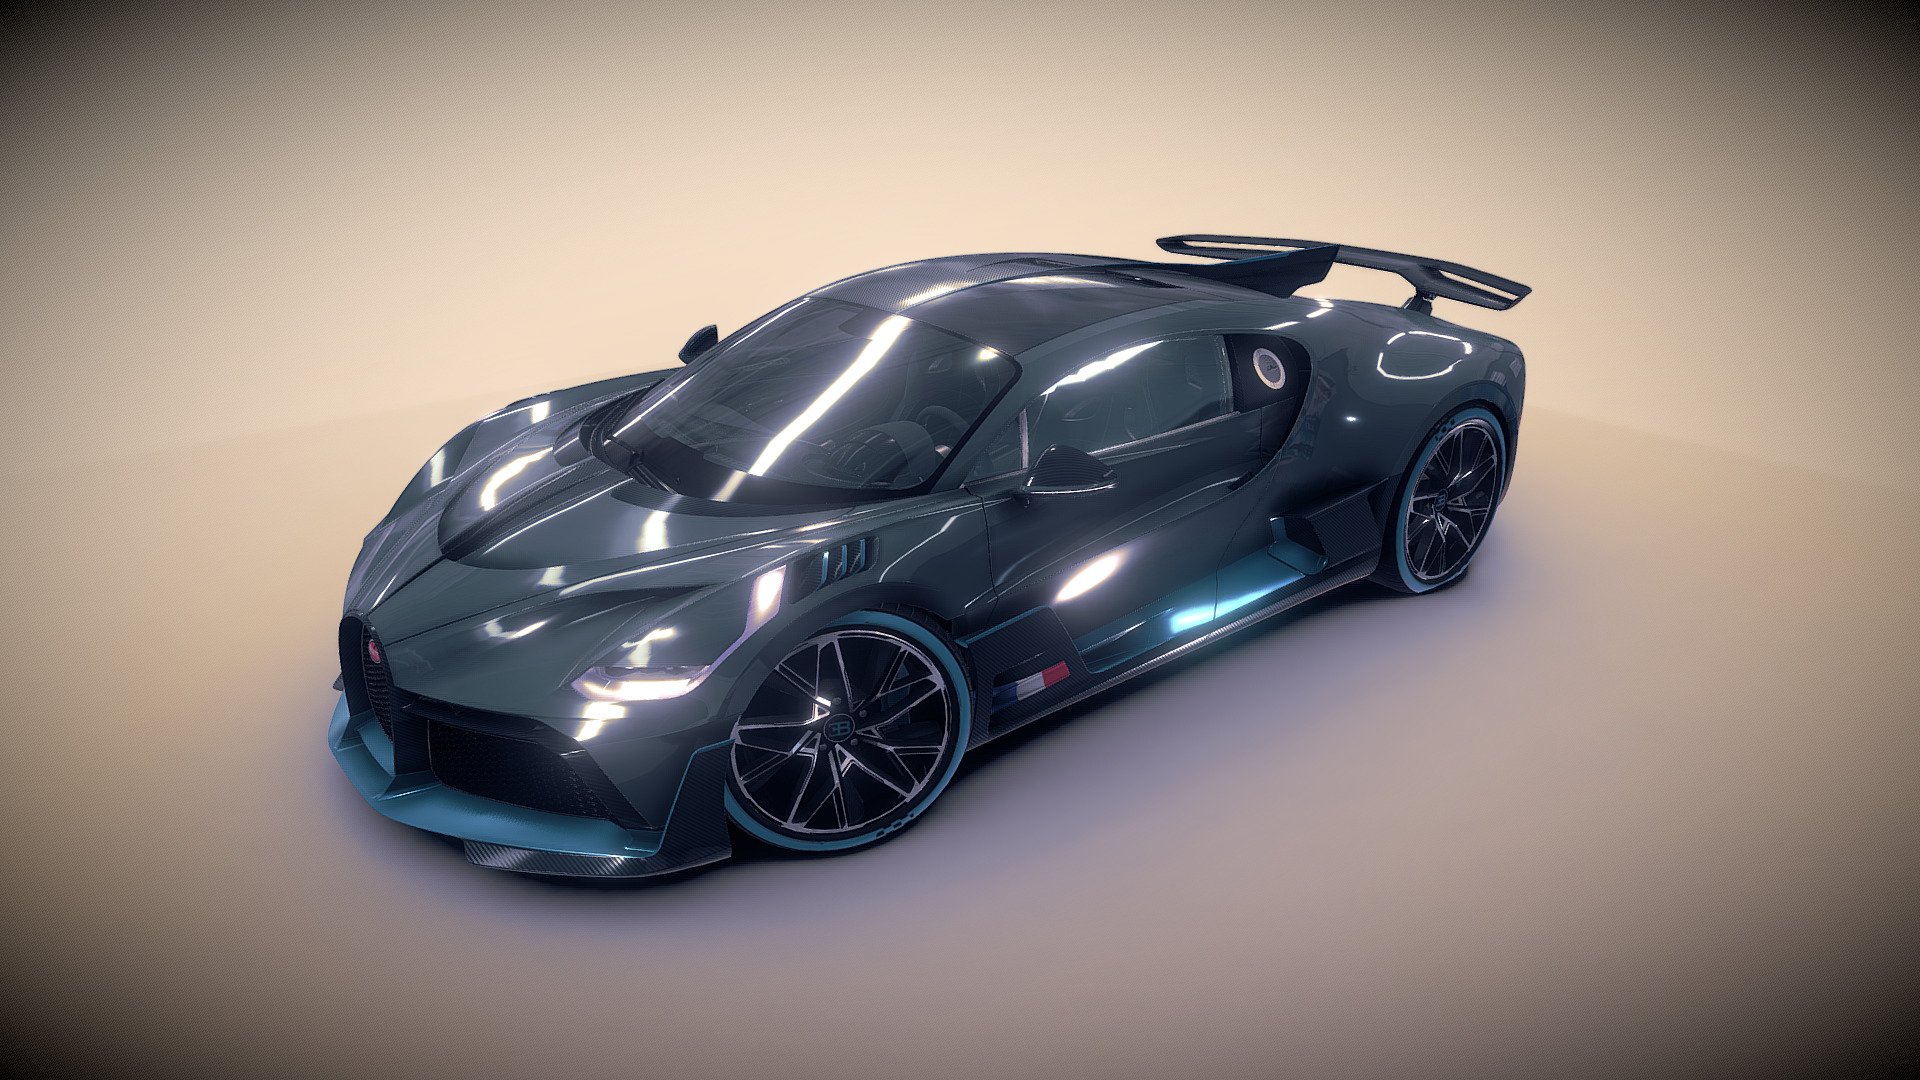 3dsmax 2018
photoshop
substance painter

Dont Ask for free downloads, it will never happen! - Bugatti Divo 2019 - 3D model by OGL (@GaryLim) 3d model